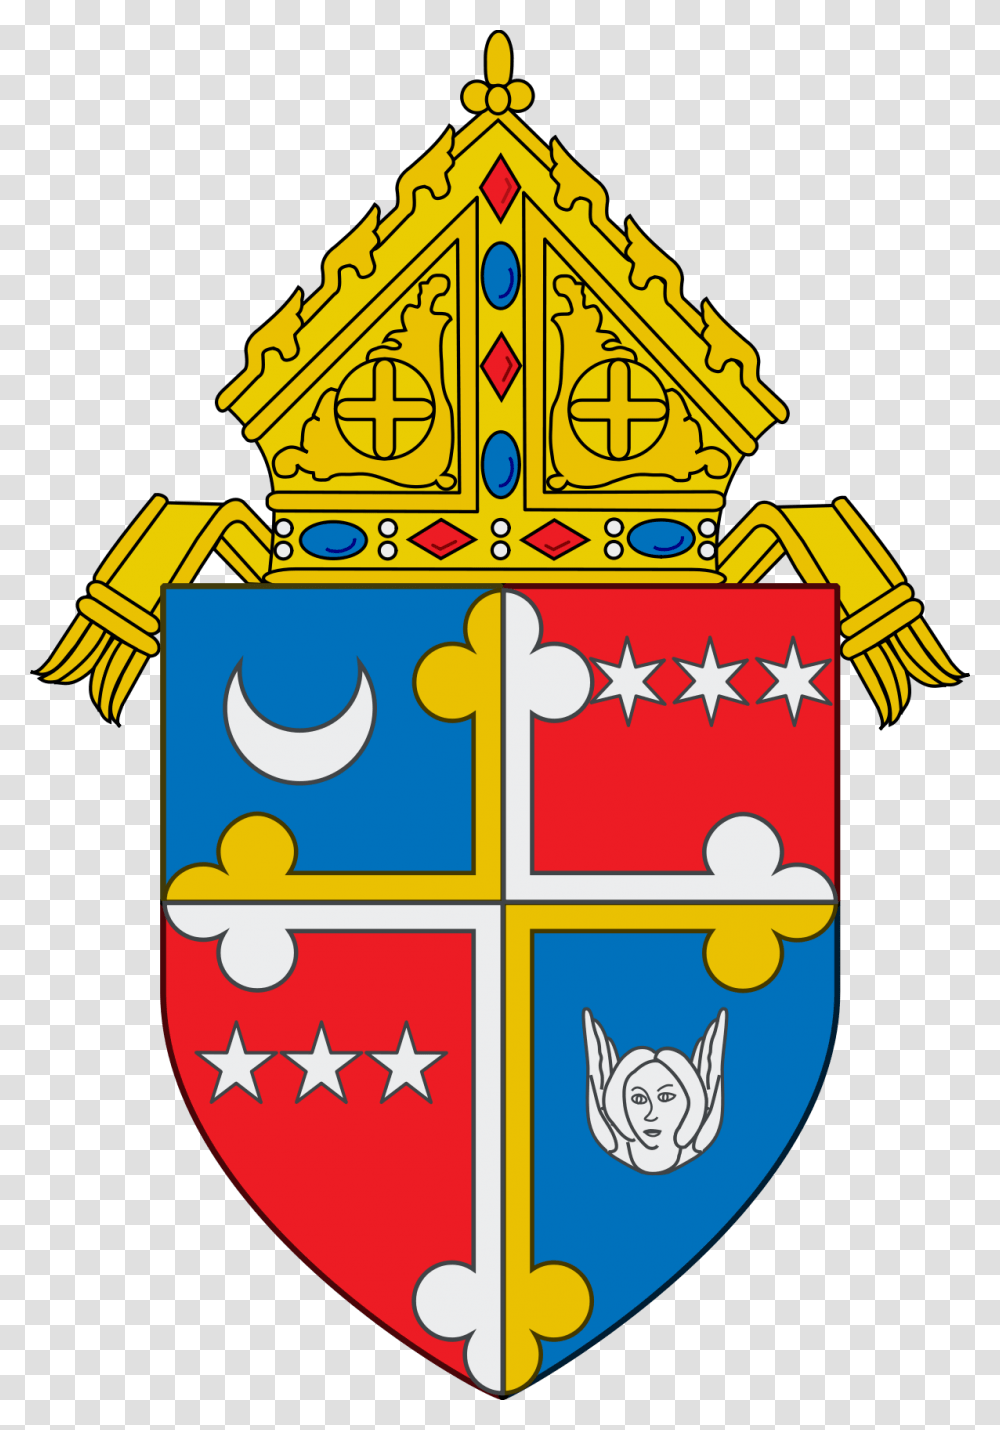 Archdiocese Of Newark Coat Of Arms, Armor, Shield Transparent Png